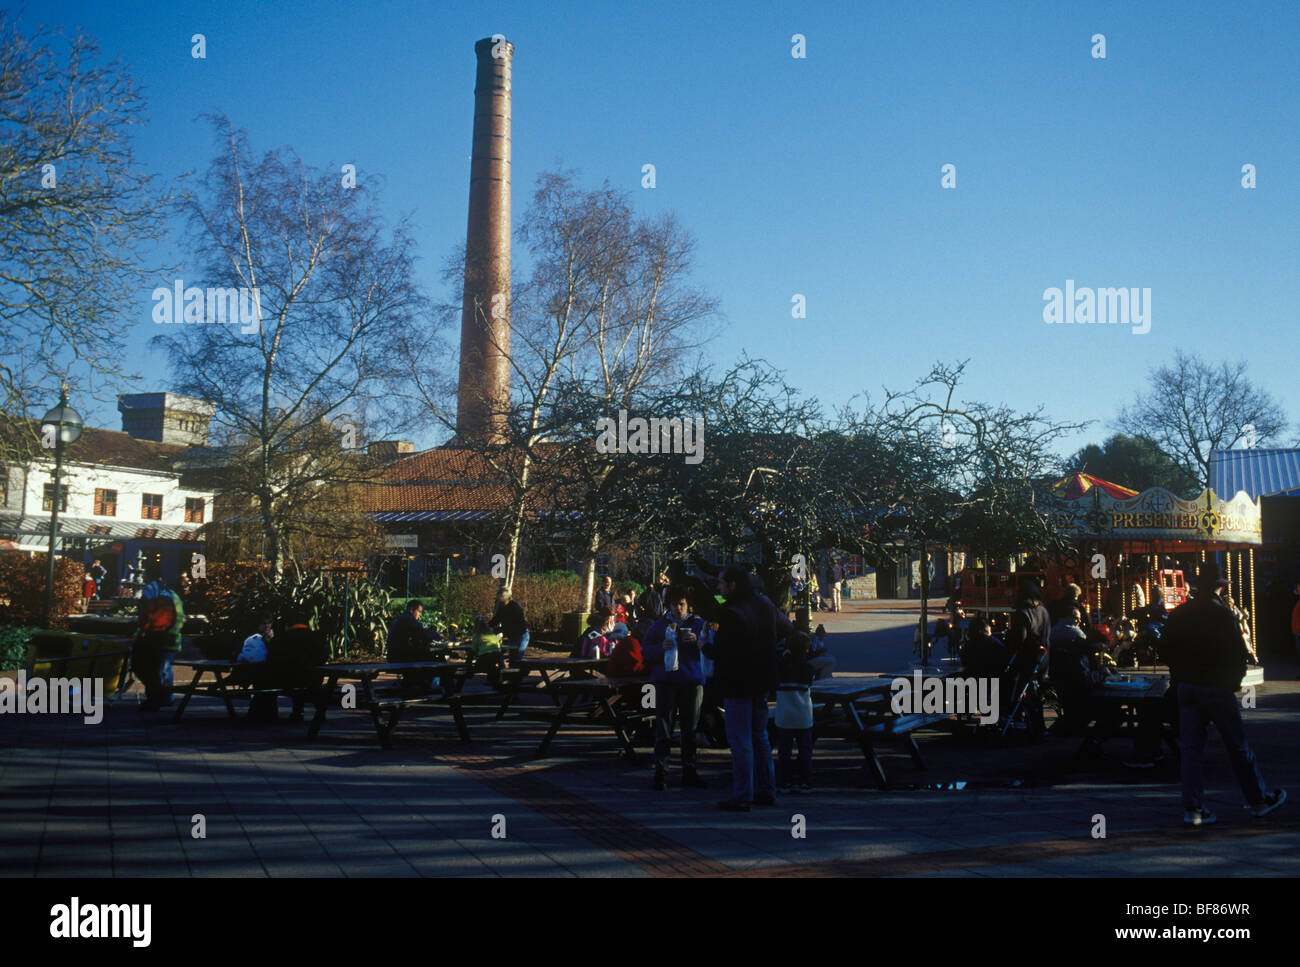 Street Somerset UK. Clarks Shopping Village on site of former shoe factory  tall chimney outlet stores Stock Photo - Alamy